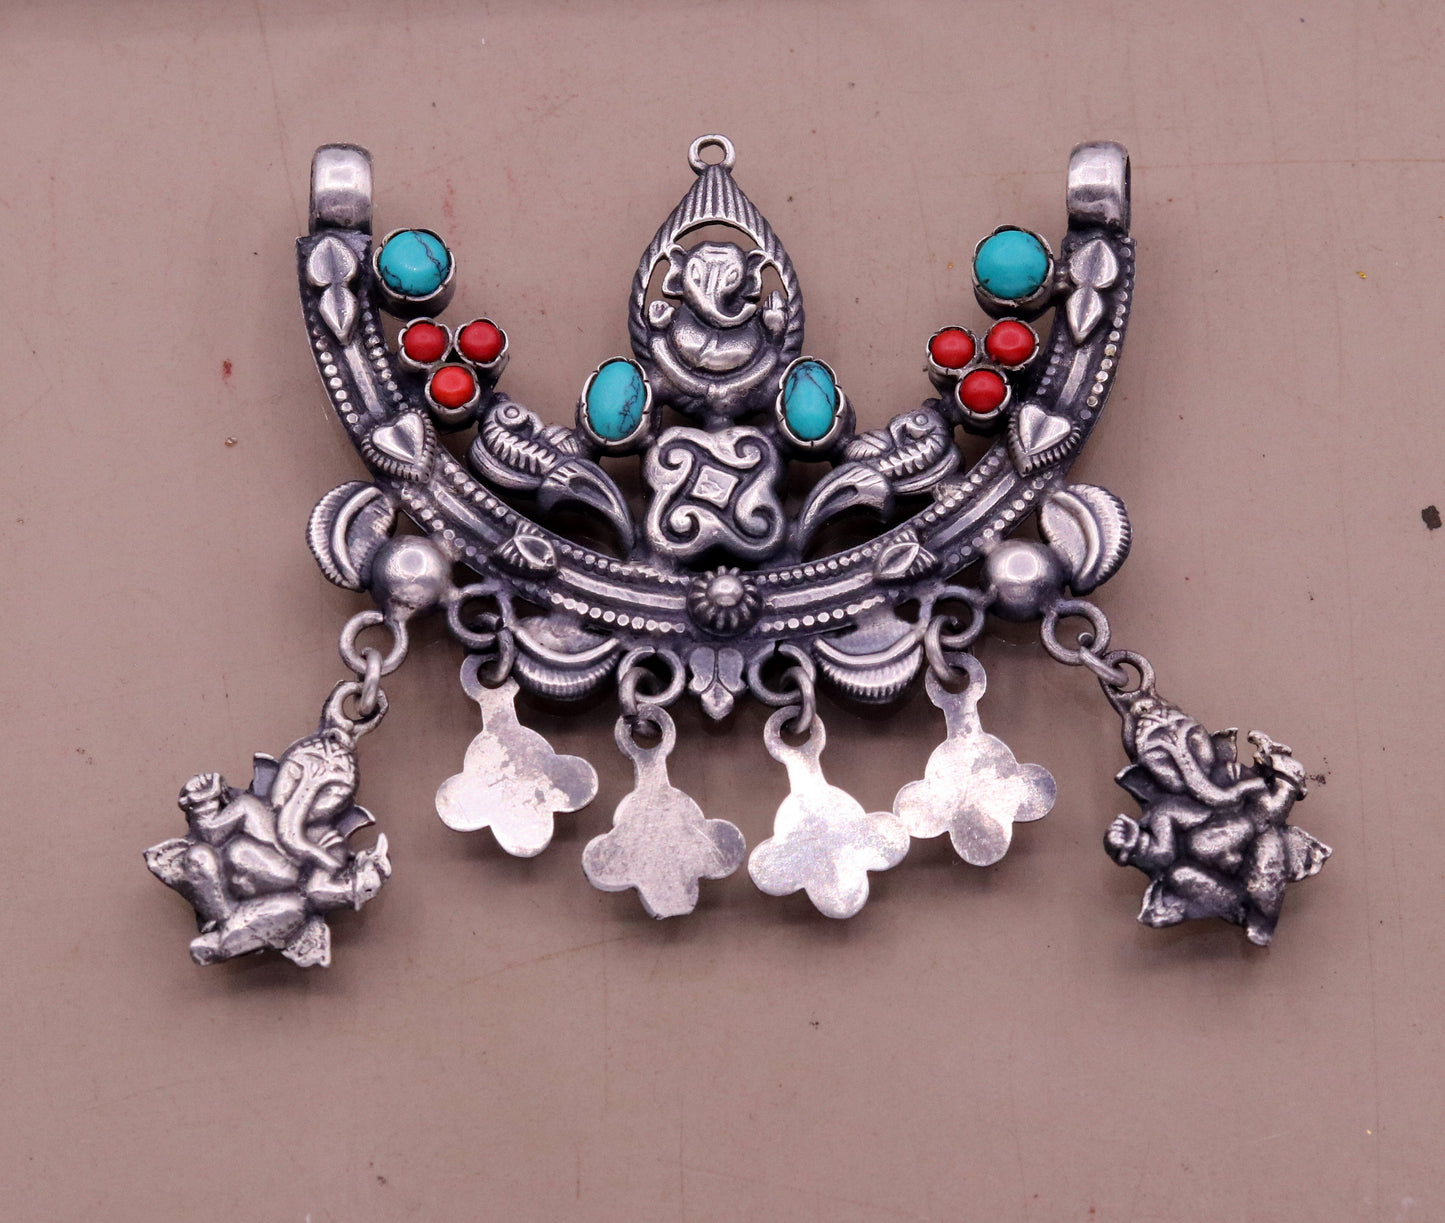 925 Sterling silver handmade vintage ethnic Ganesha design pendant amazing turquoise coral stone pendant tribal belly dance jewelry nsp298 - TRIBAL ORNAMENTS